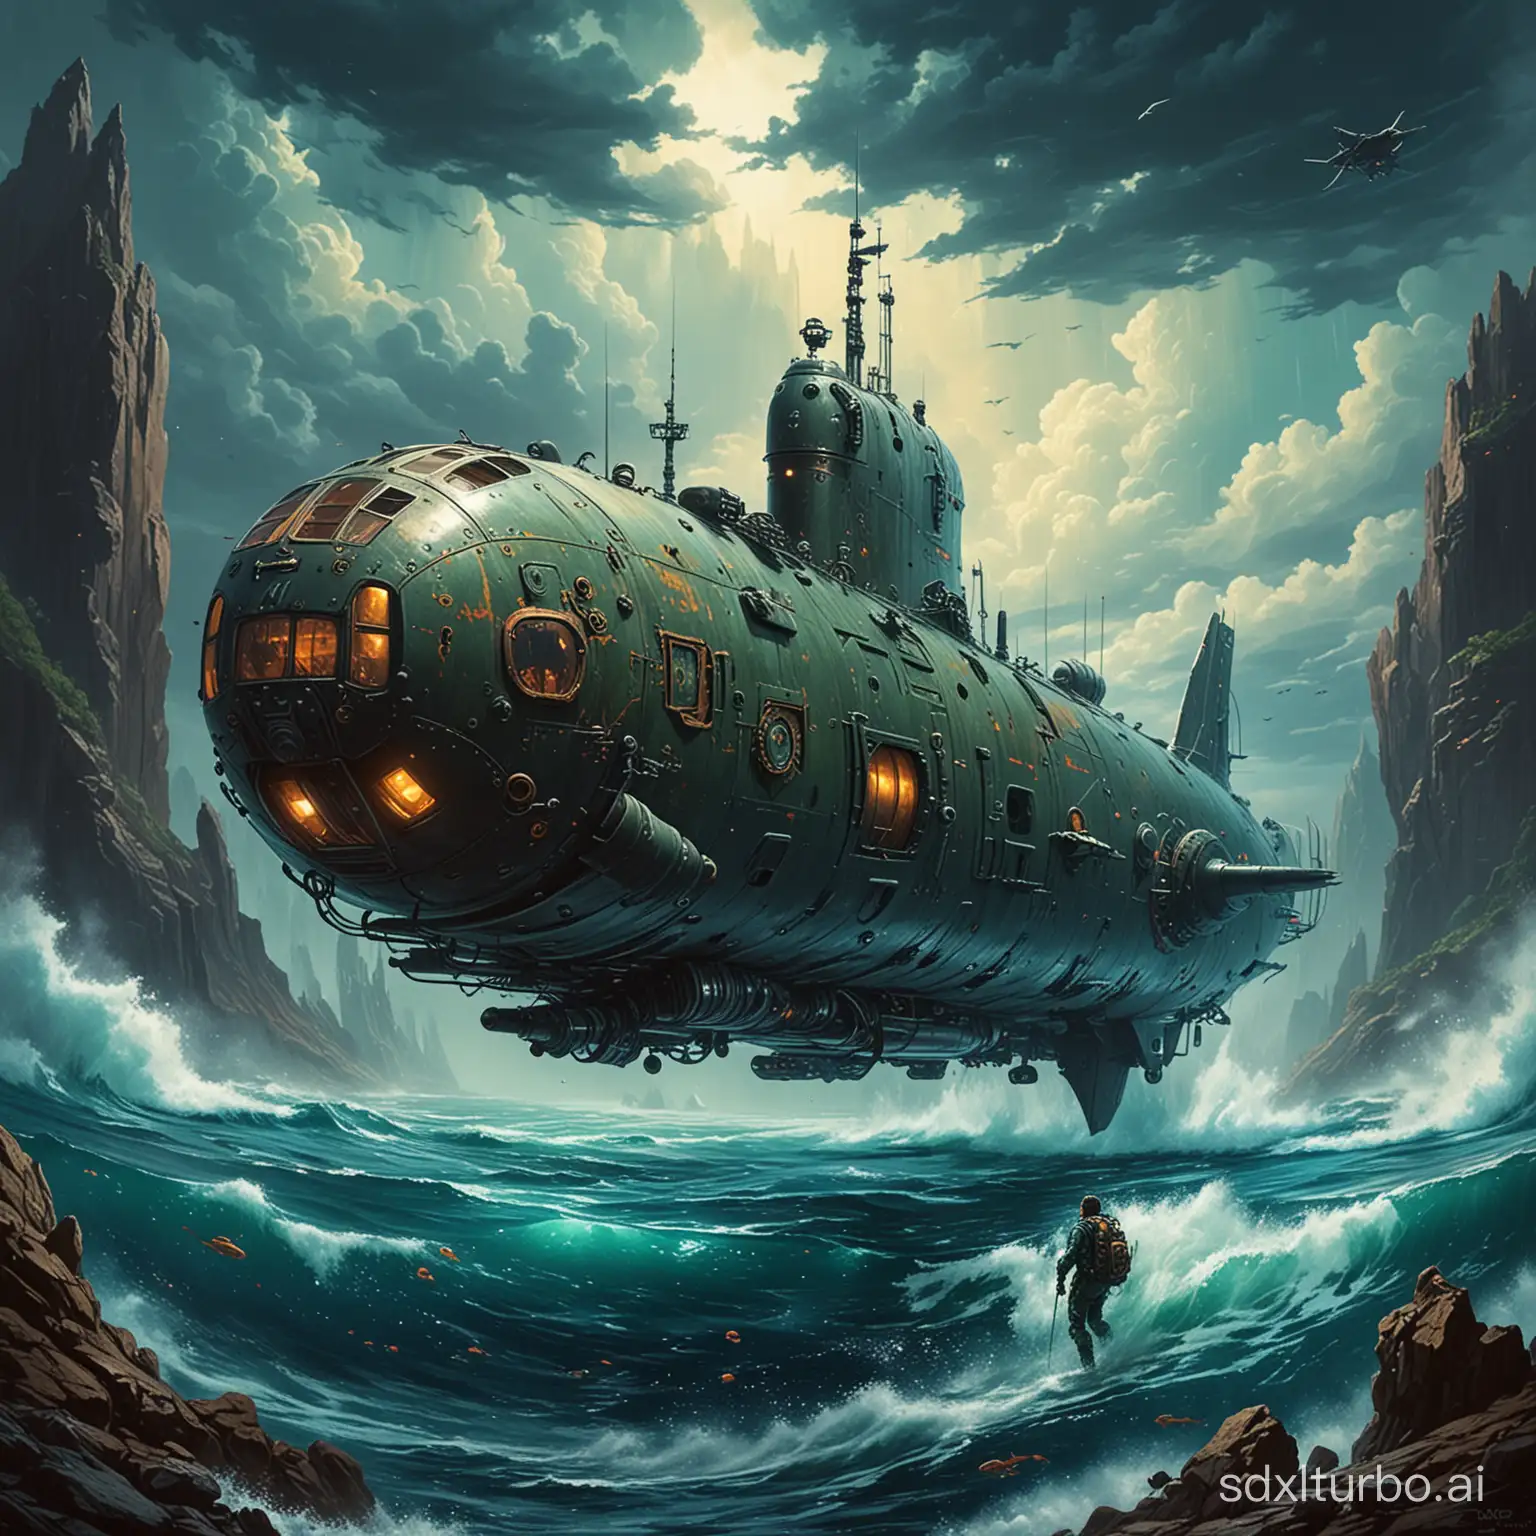 Futuristic-Submarine-Encounter-with-Dragon-in-SciFi-Painting